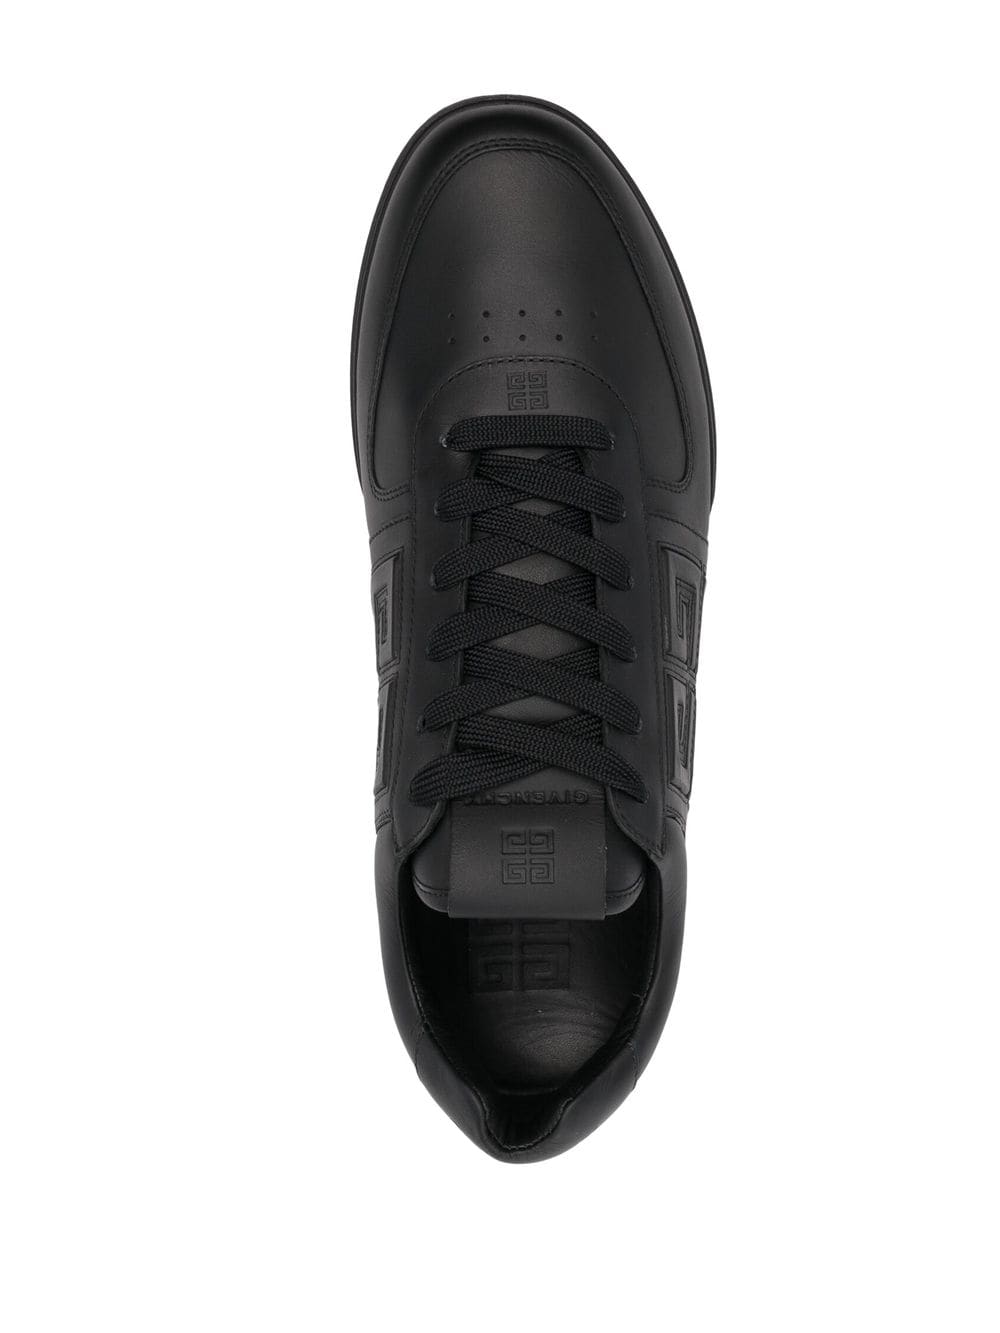 GIVENCHY 4G Low-Top Sneaker for Men - Black Leather